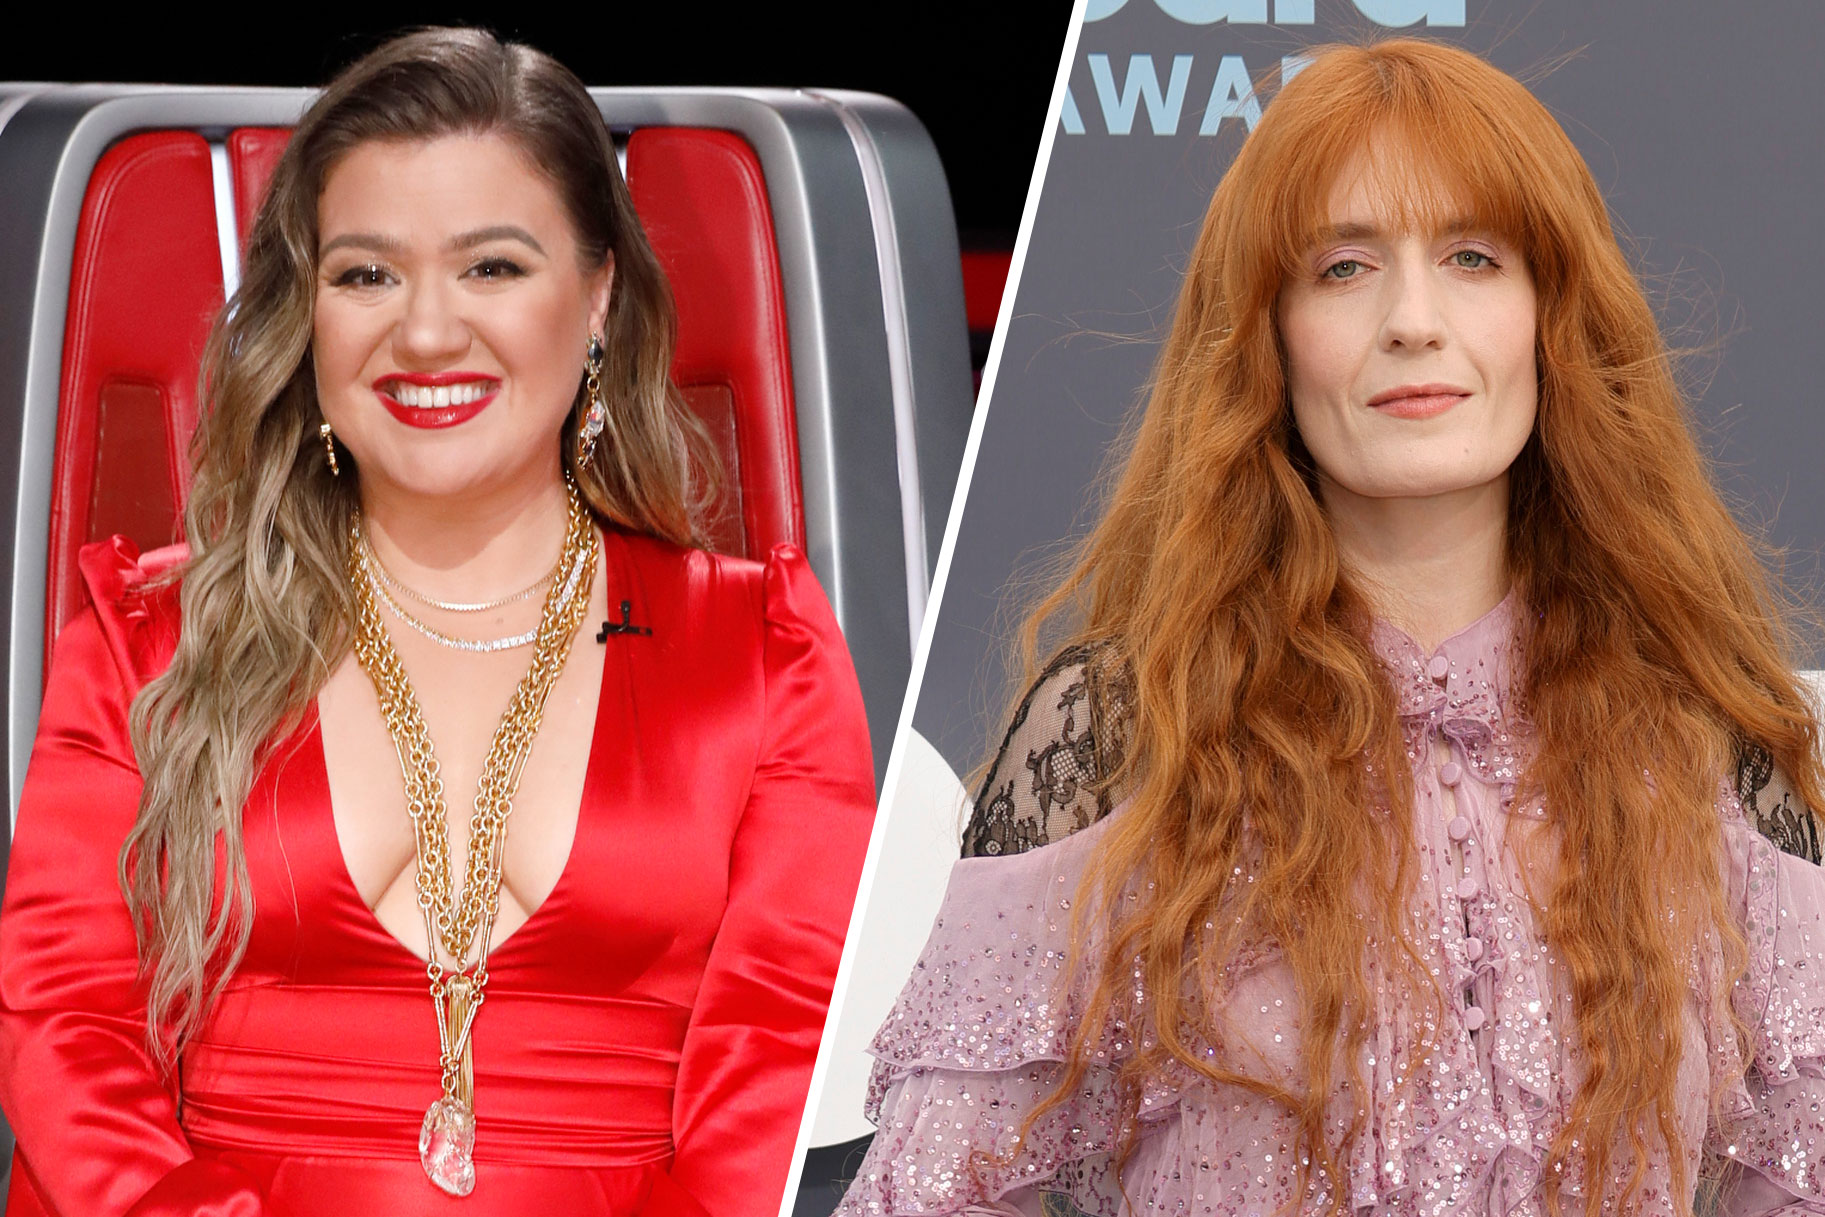 Kelly Clarkson covers Florence Welch